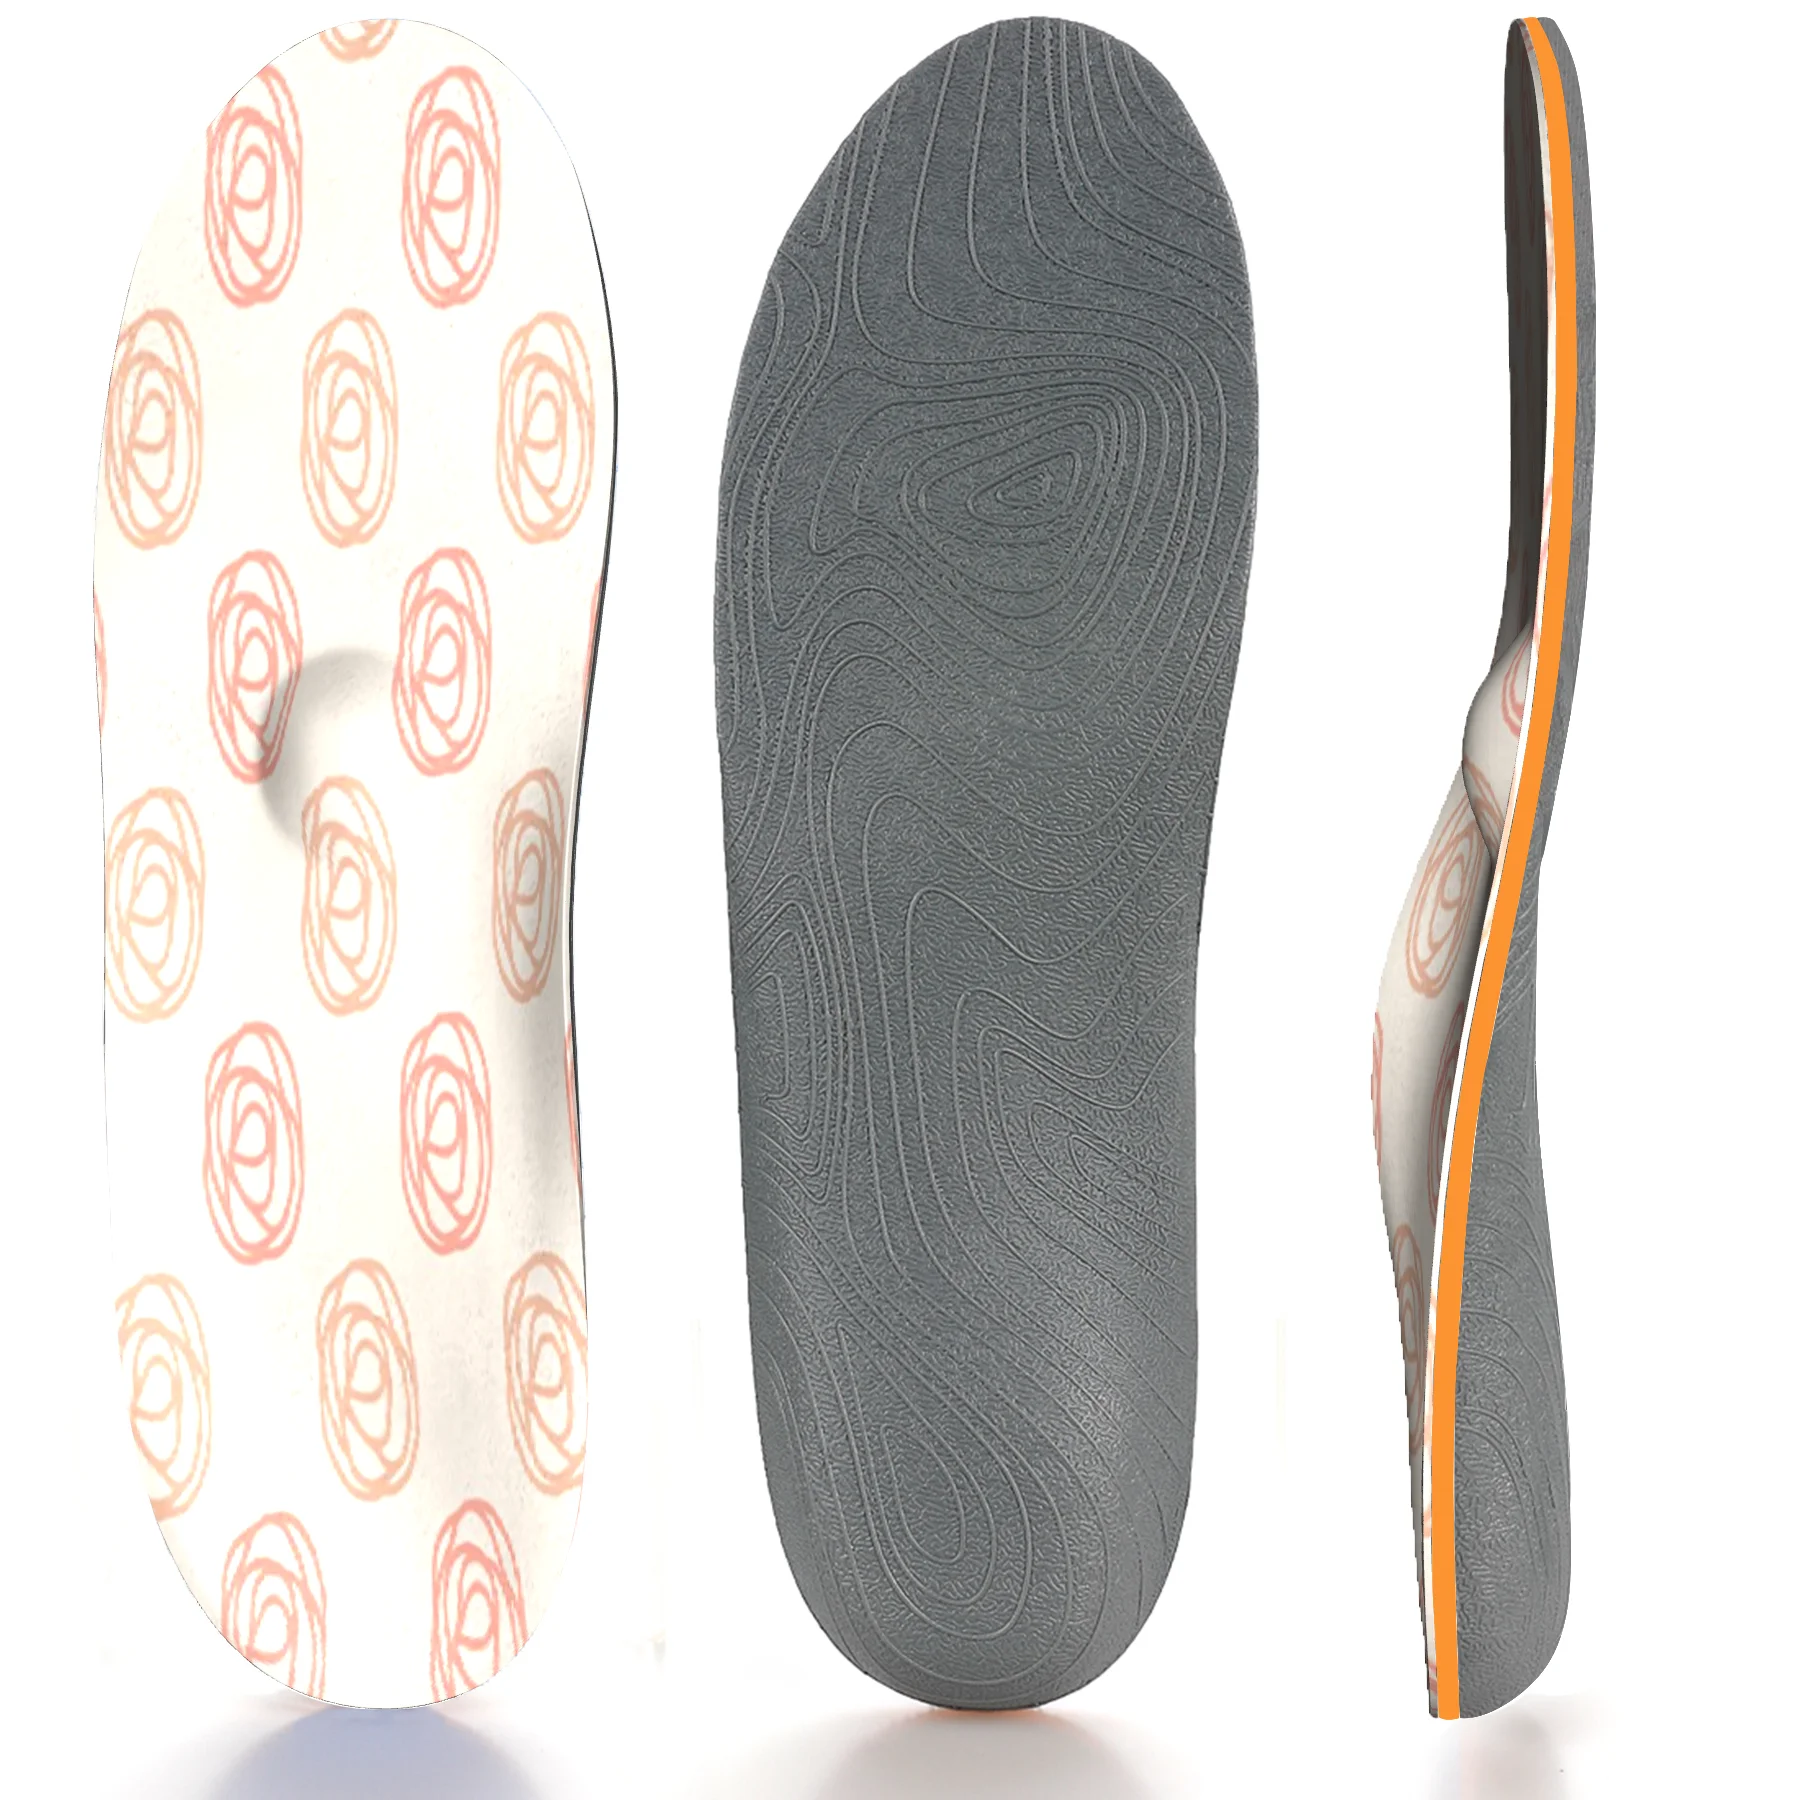 

Orange Pattern High Arch Support Insole Memory Foam Ease Plantillas Fascitis Plantar Foot Pain Orthopedic Insoles for Women